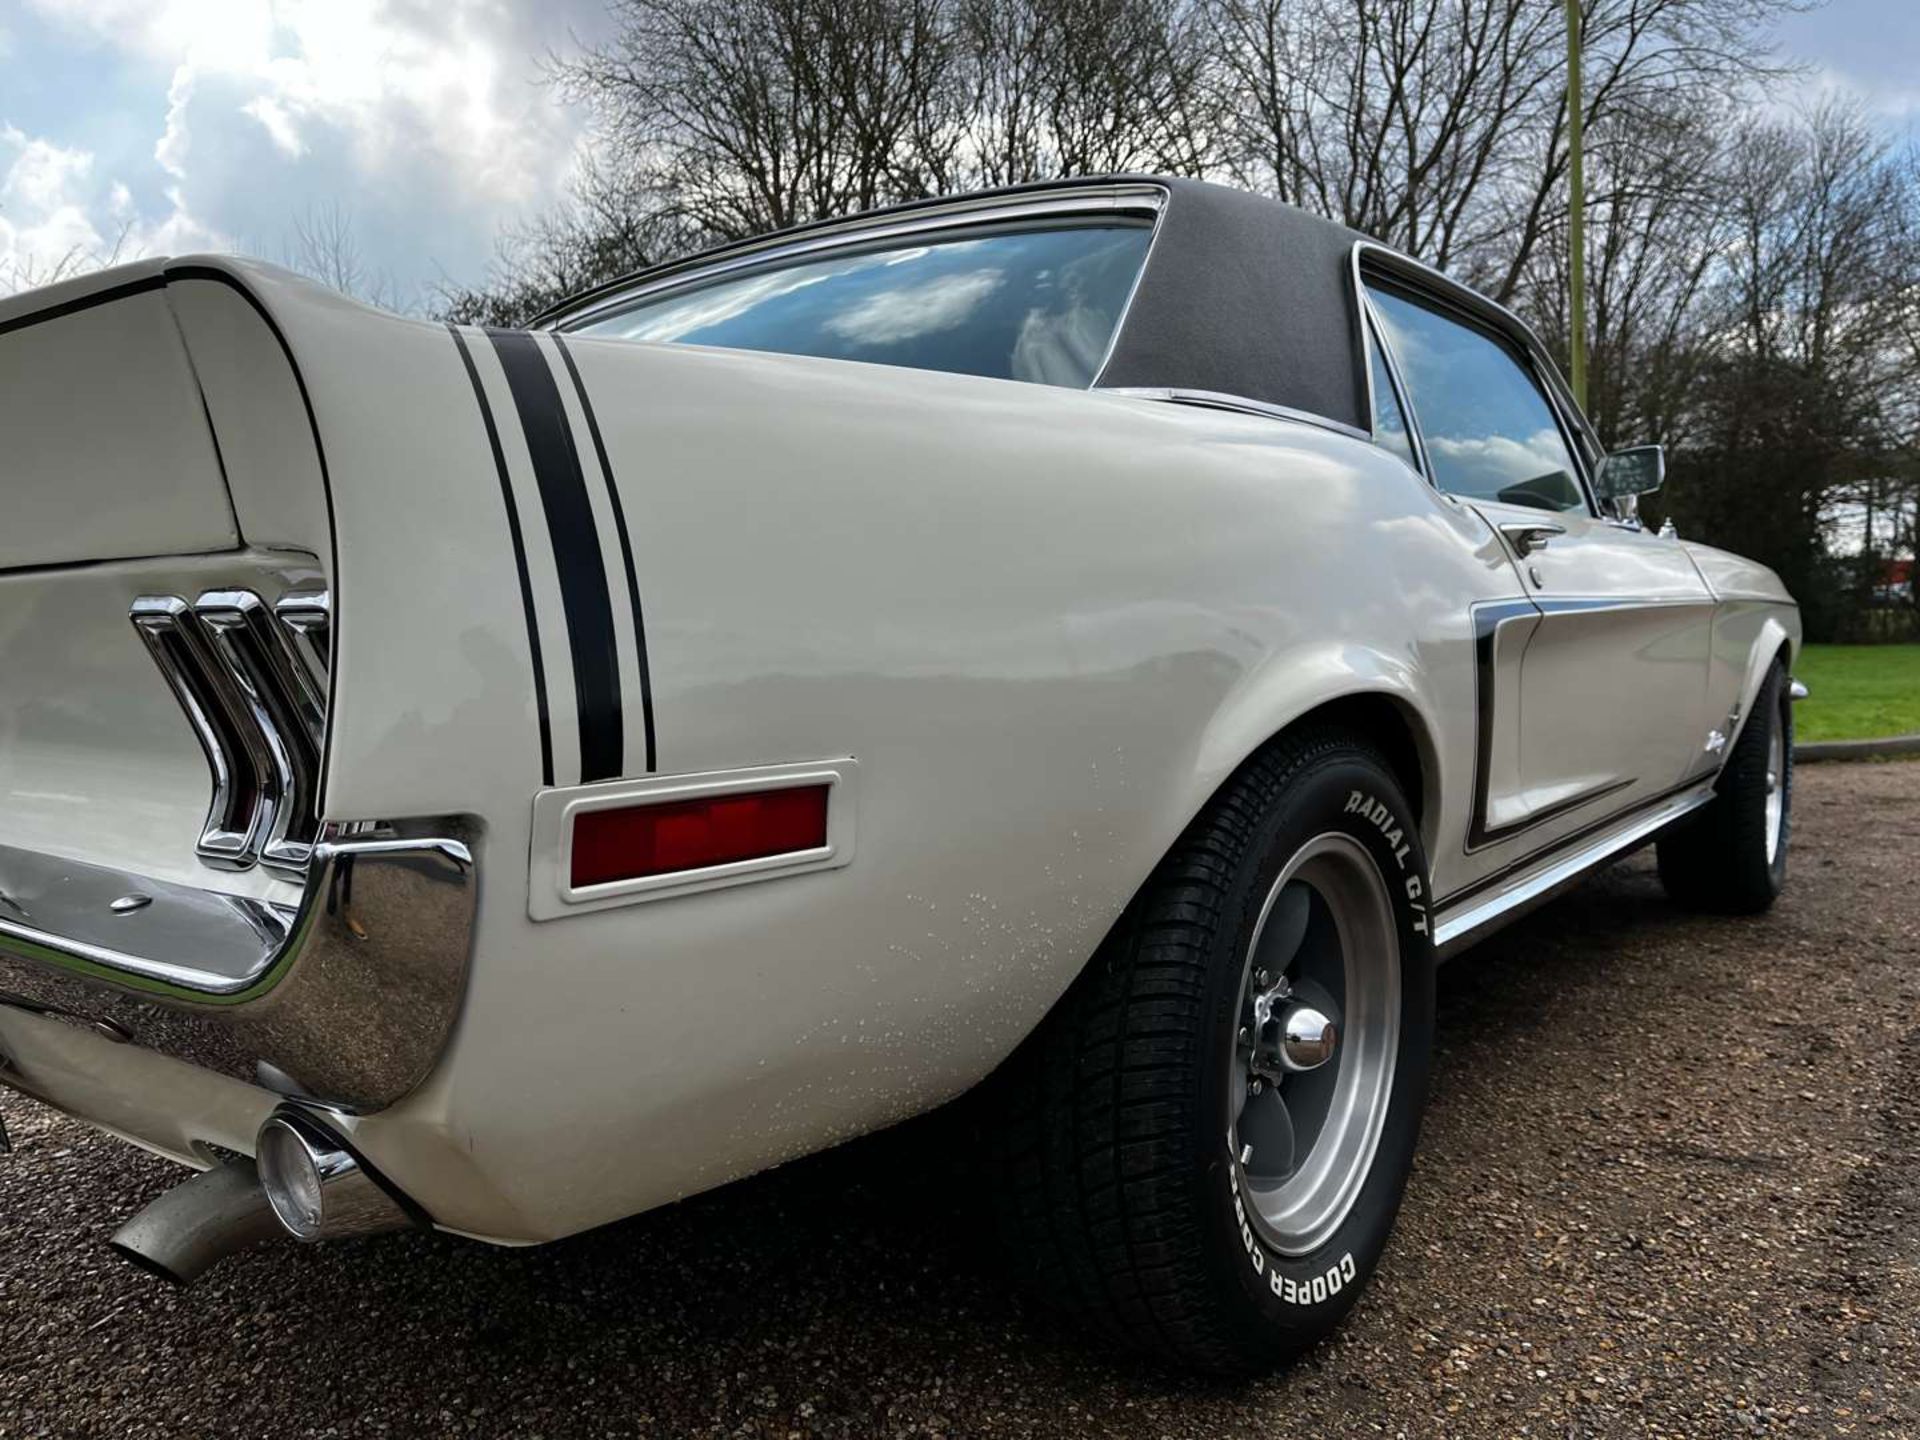 1968 FORD MUSTANG 5.0 V8 AUTO COUPE LHD - Image 12 of 29